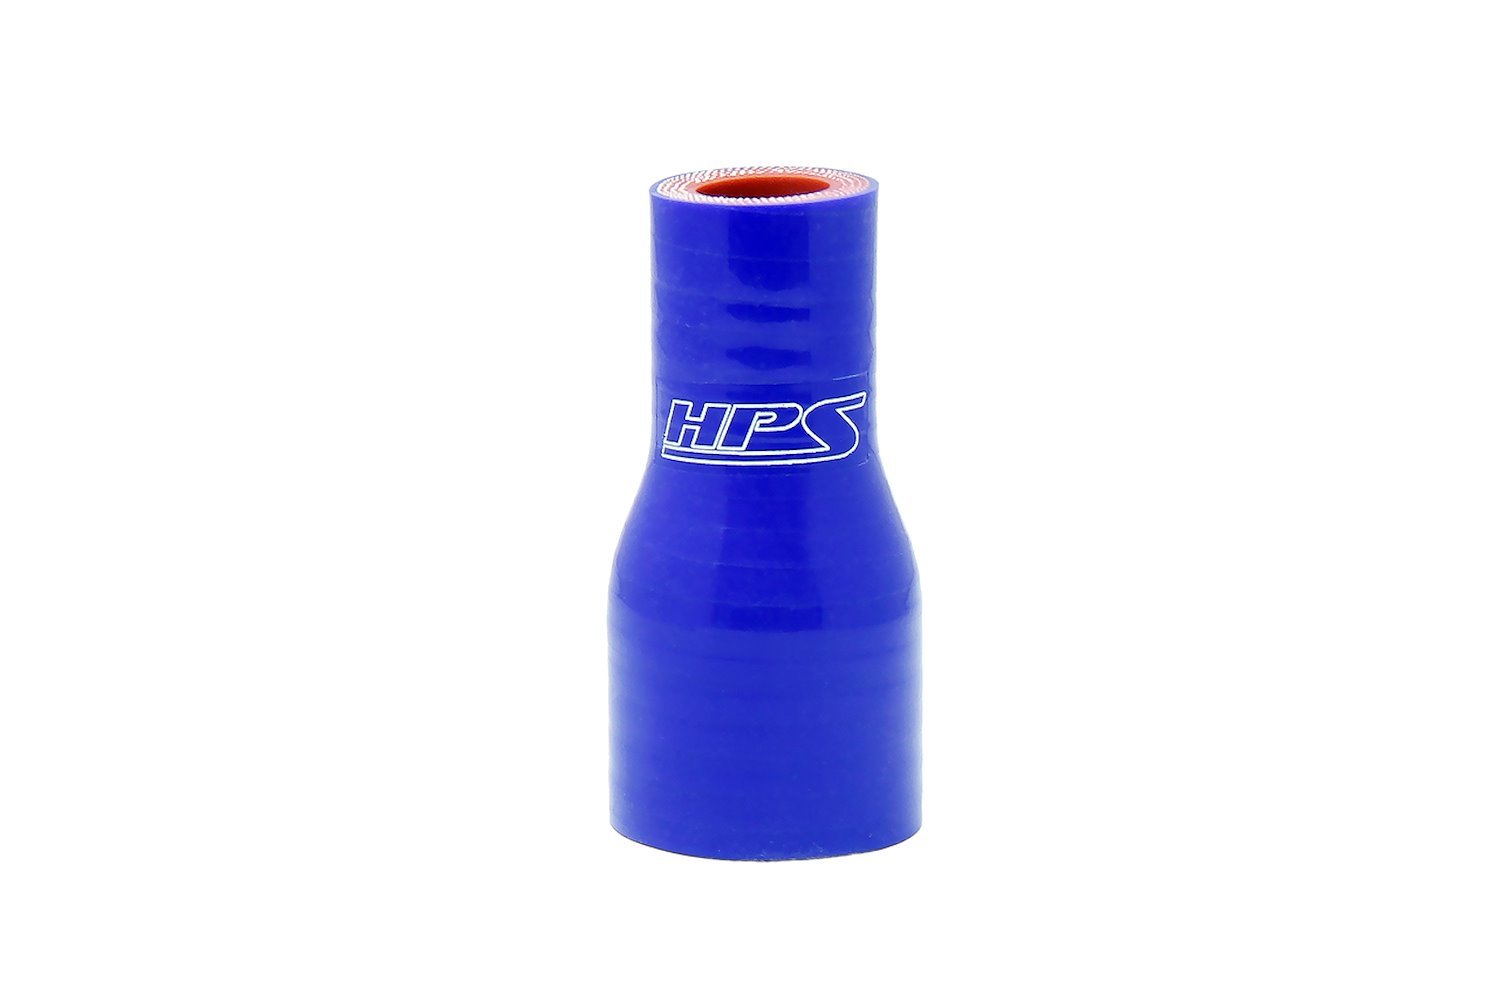 HTSR-138-200-BLUE Silicone Reducer Hose, High-Temp 4-Ply Reinforced, 1-3/8 in. - 2 in. ID, 3 in. Long, Blue